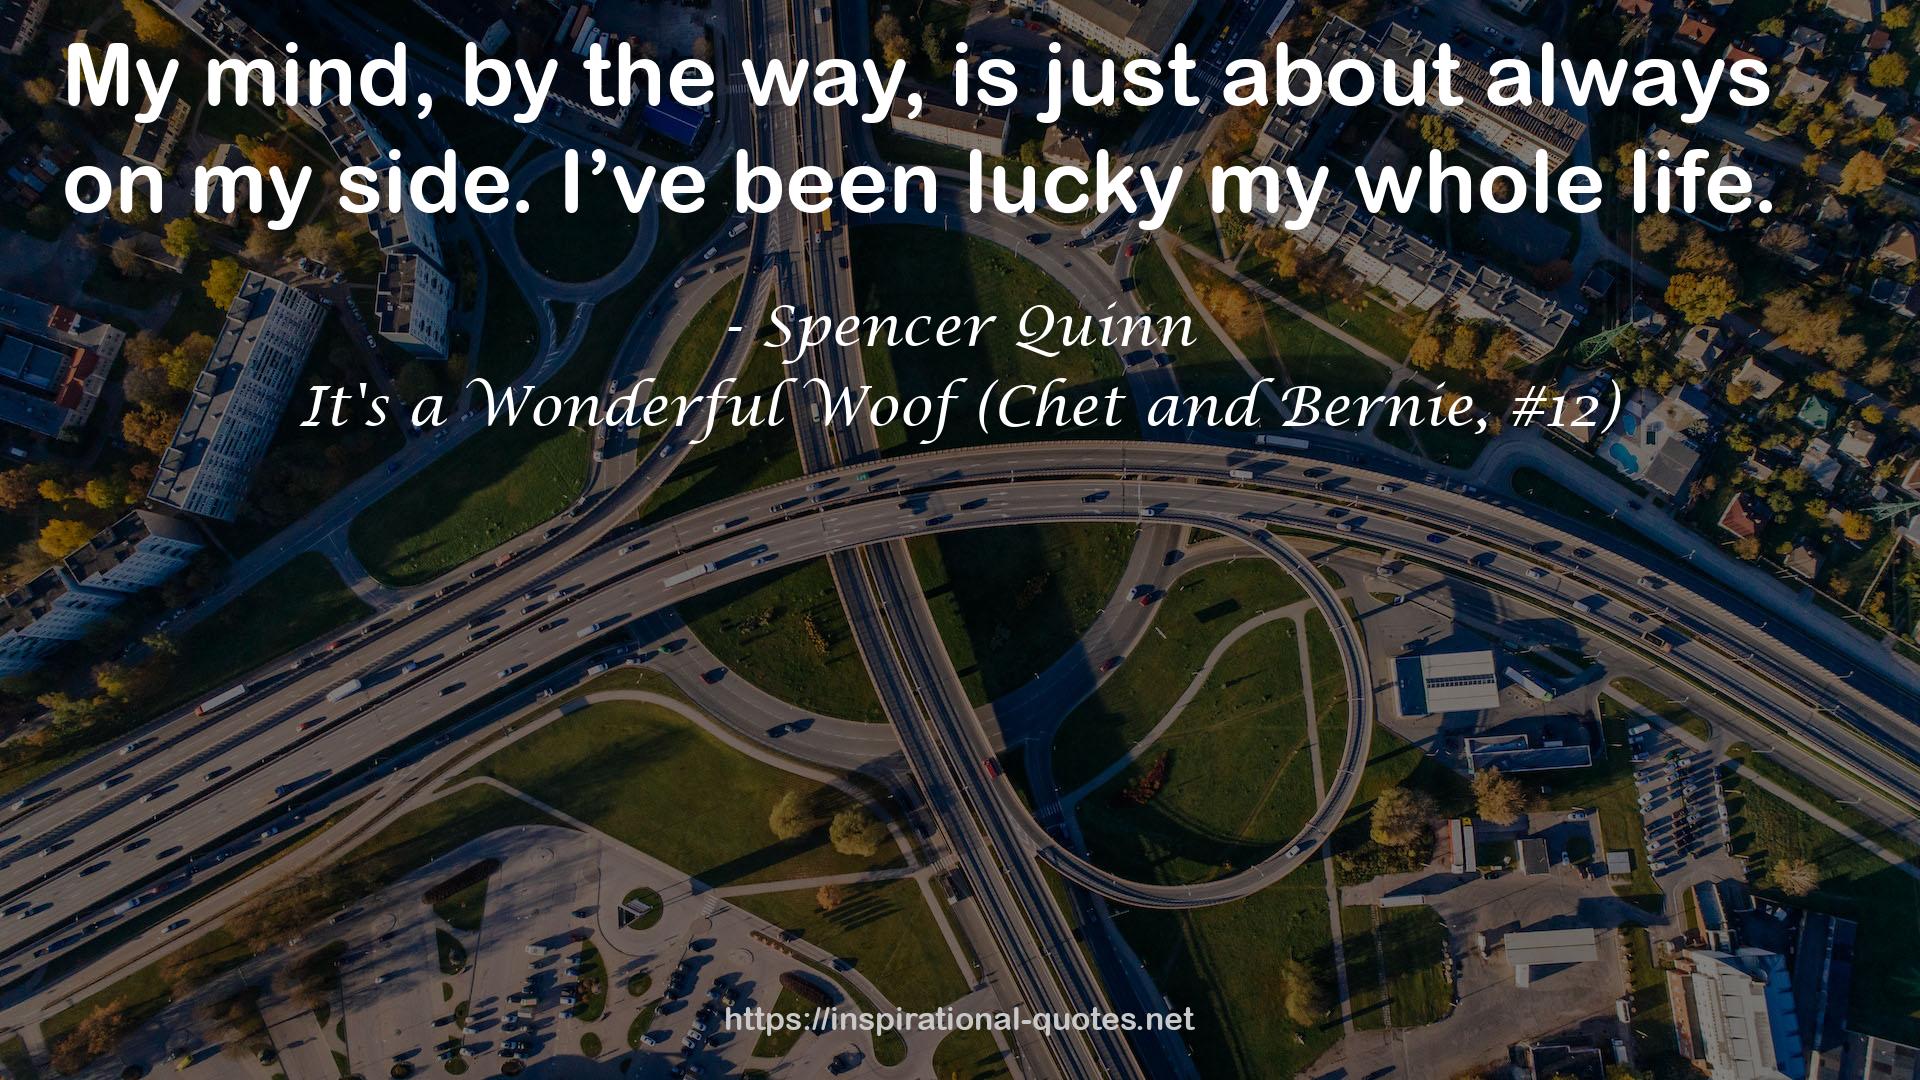 It's a Wonderful Woof (Chet and Bernie, #12) QUOTES